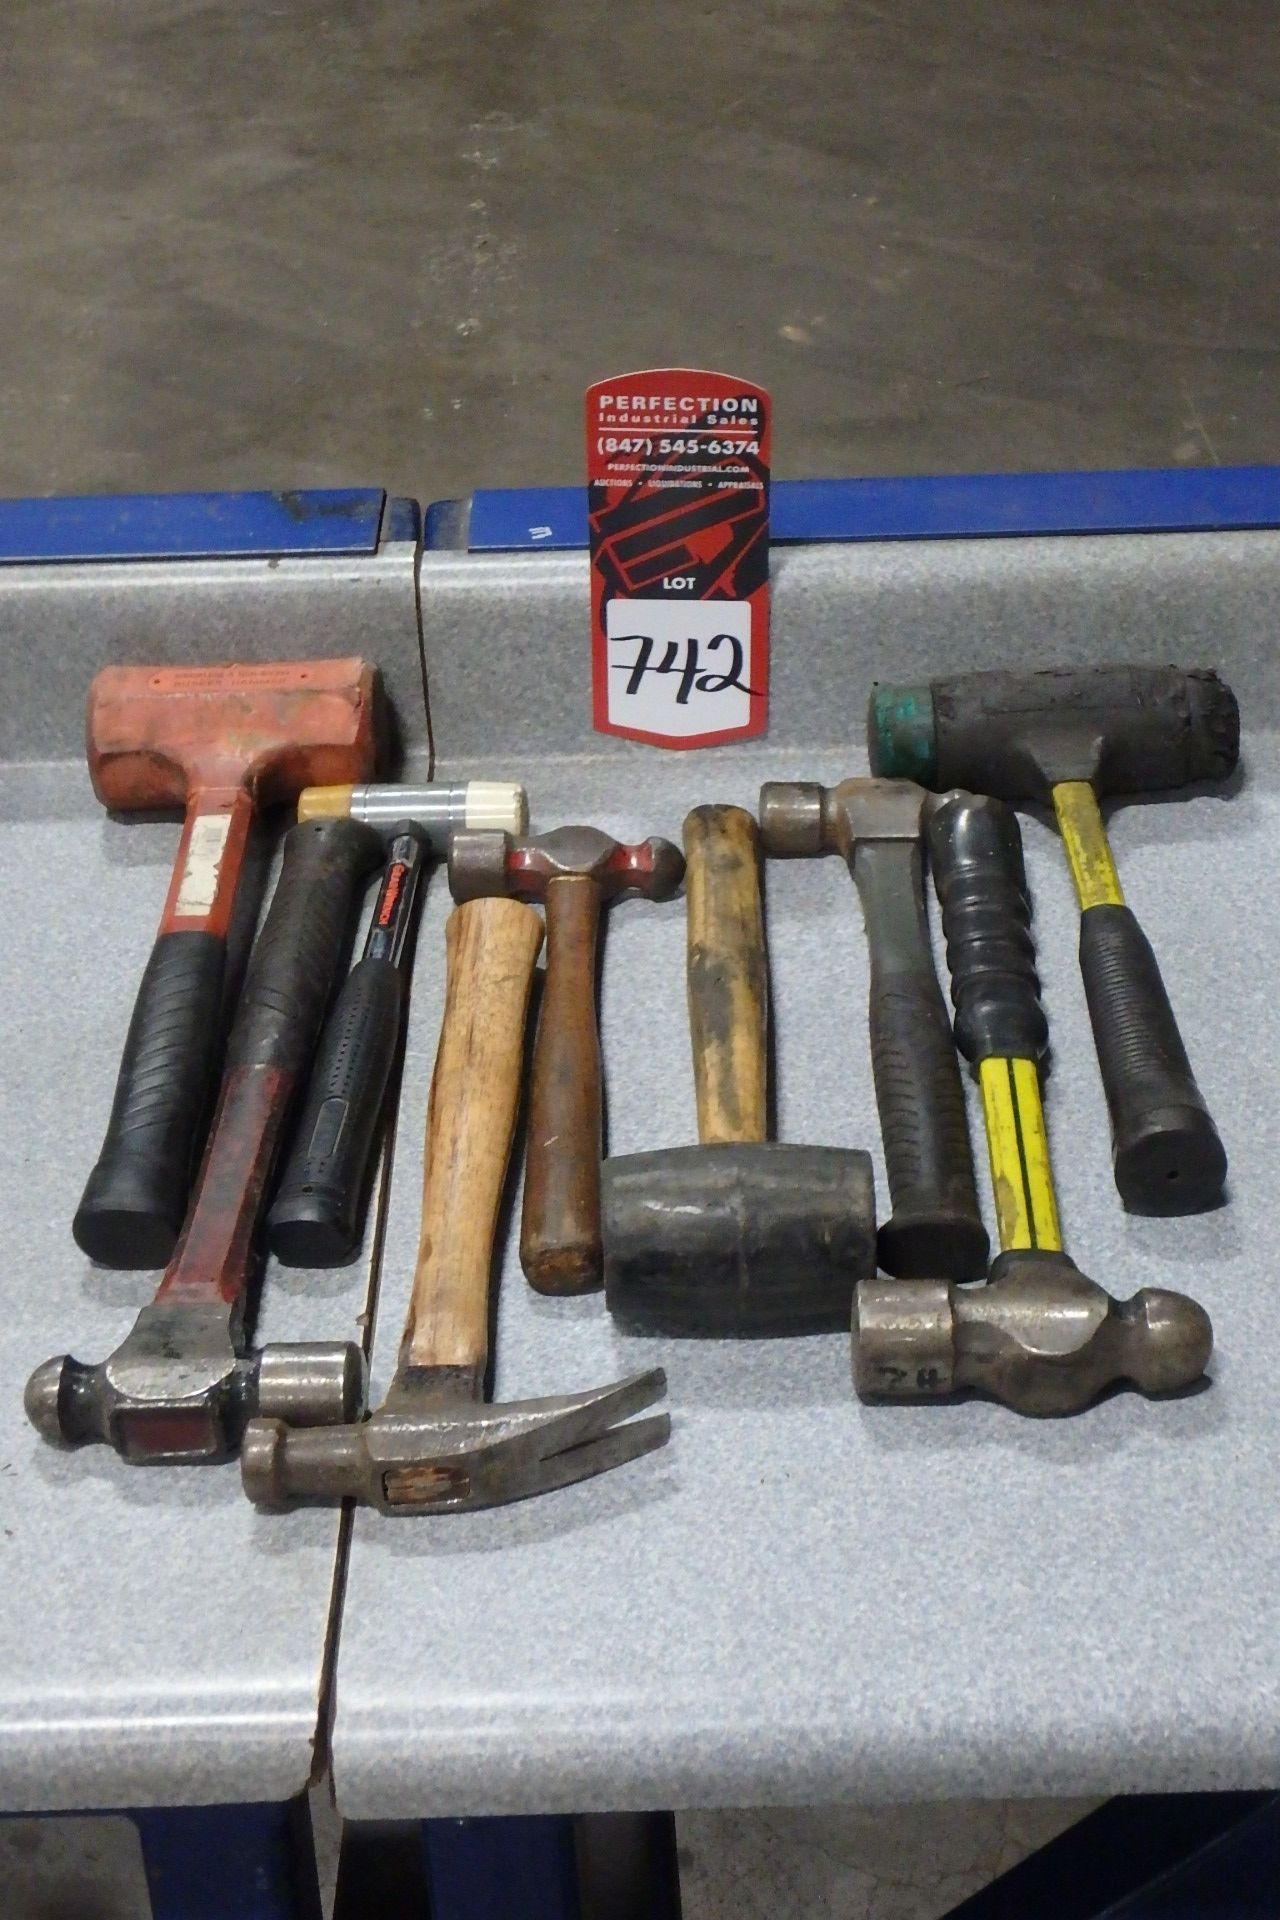 Lot Comprising (5) Assorted Ball Peen Hammers, Claw Hammer, Rubber Mallet, (2) Dead Blow Hammers